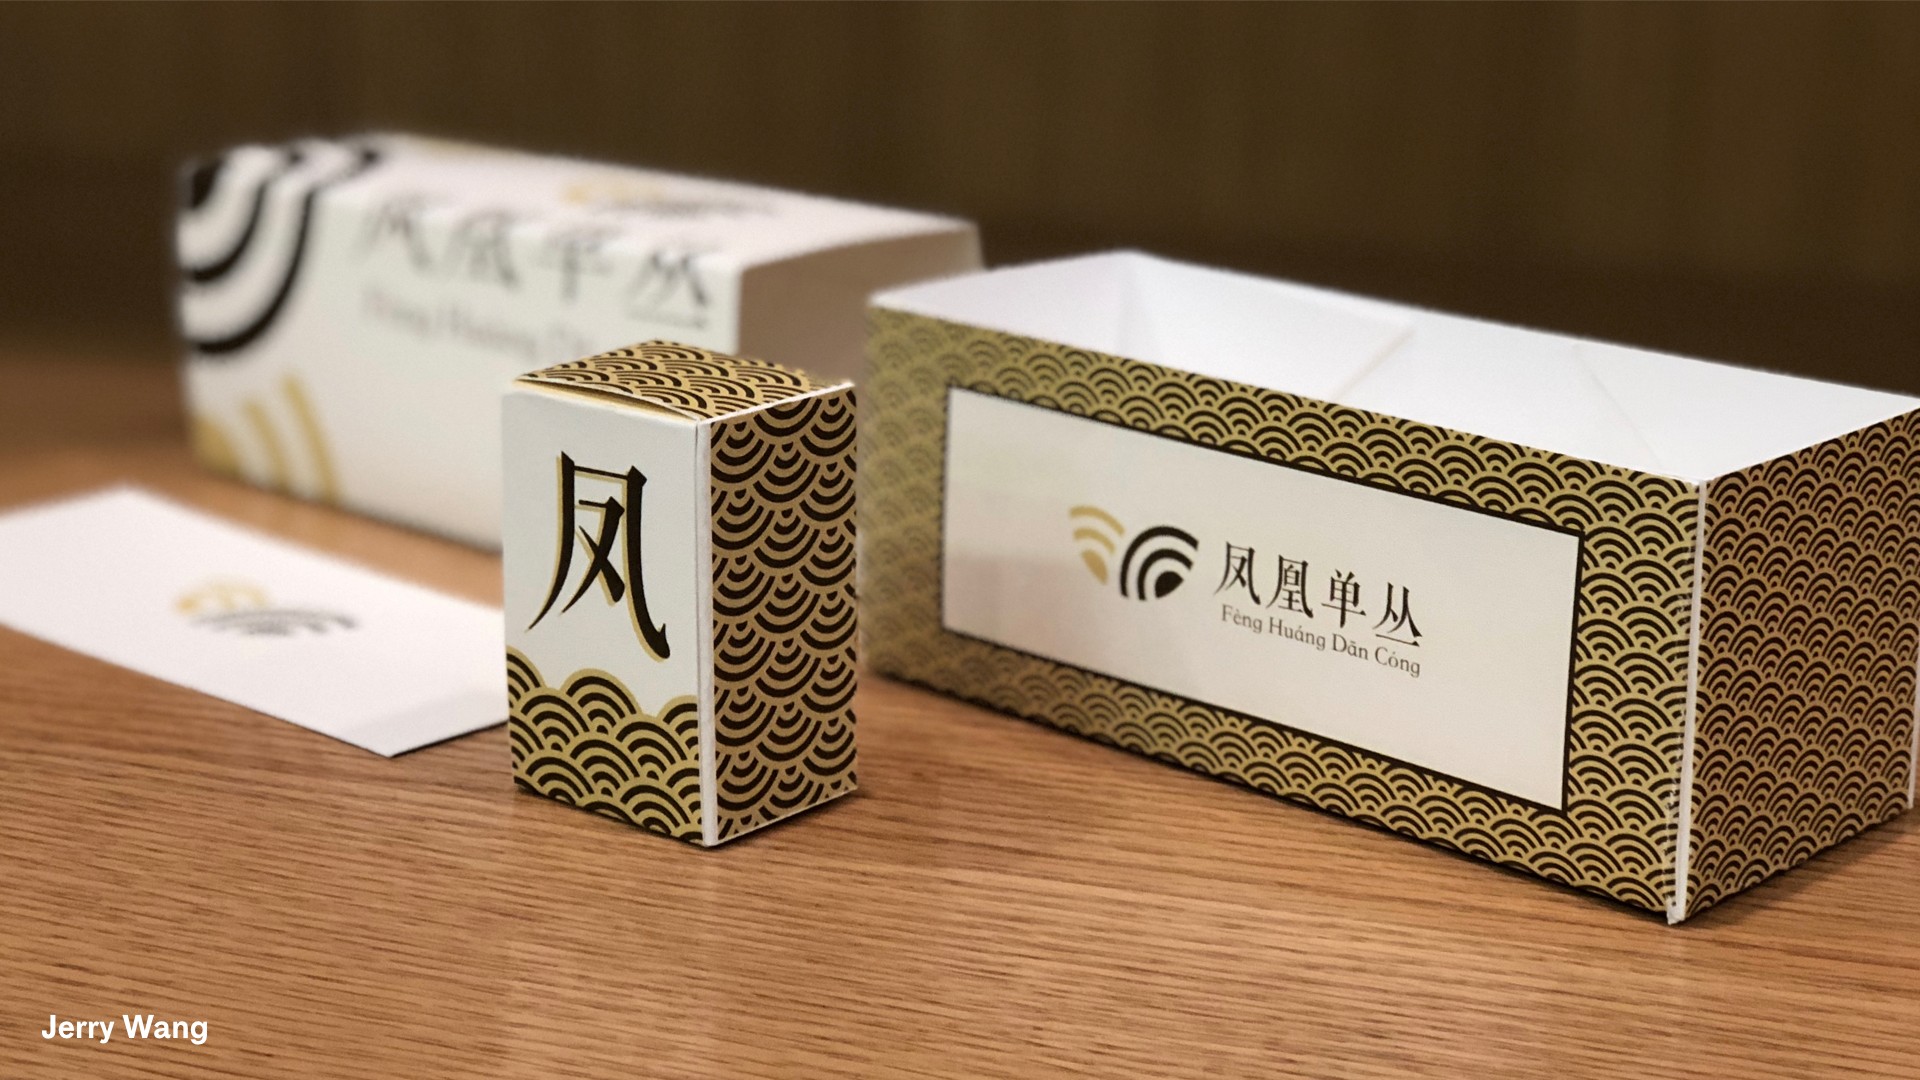 A set of boxes with asian writing and packaging.